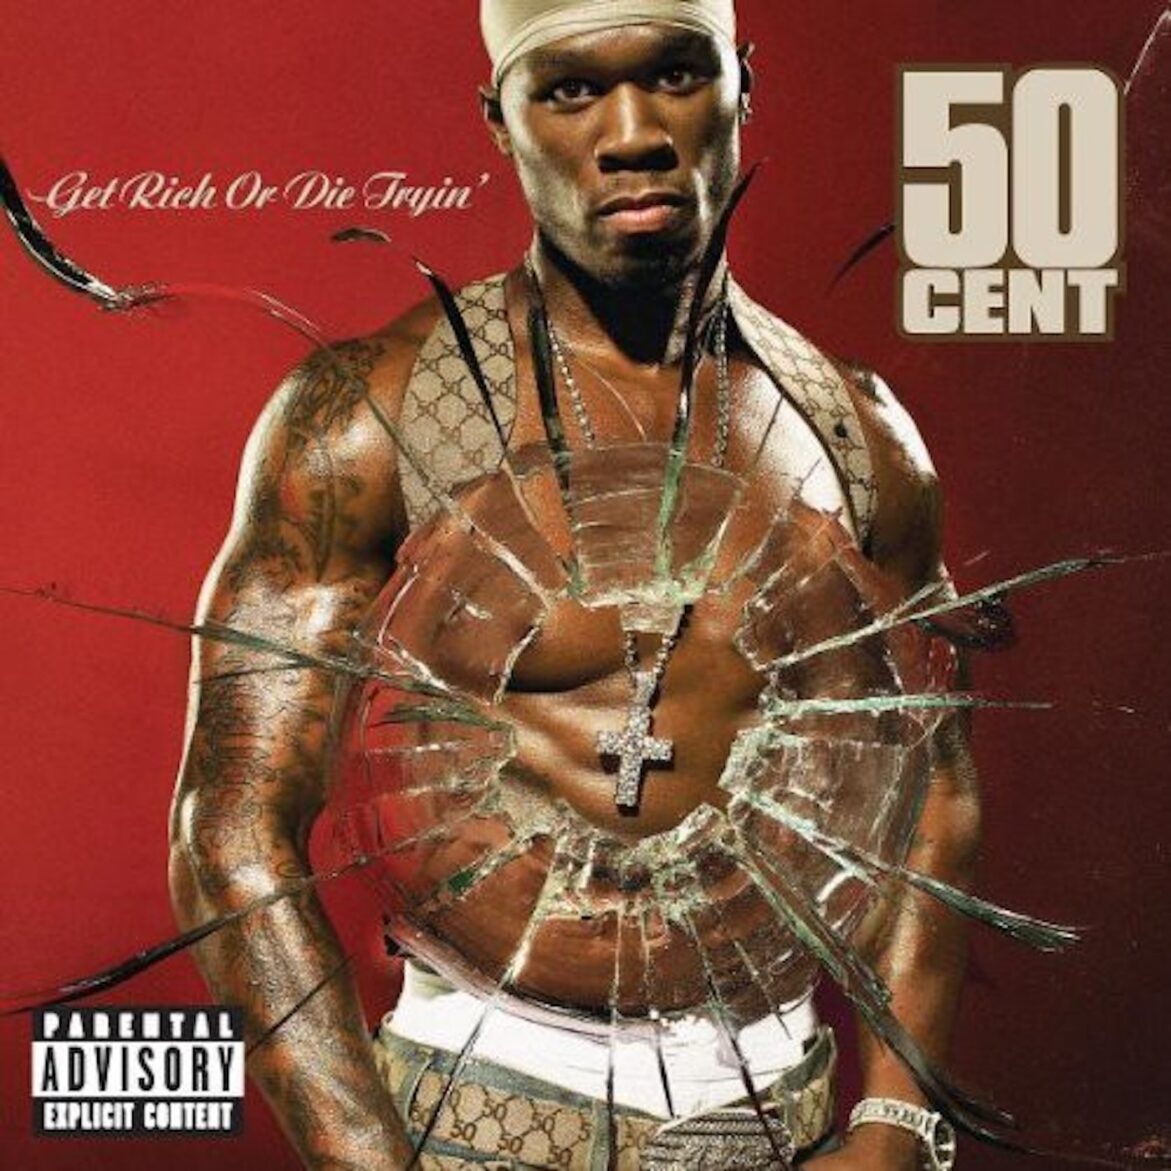 Black Podcasting - 50 Cent: Get Rich Or Die Tryin'. Hip-Hop's Lazarus Comes Forth...